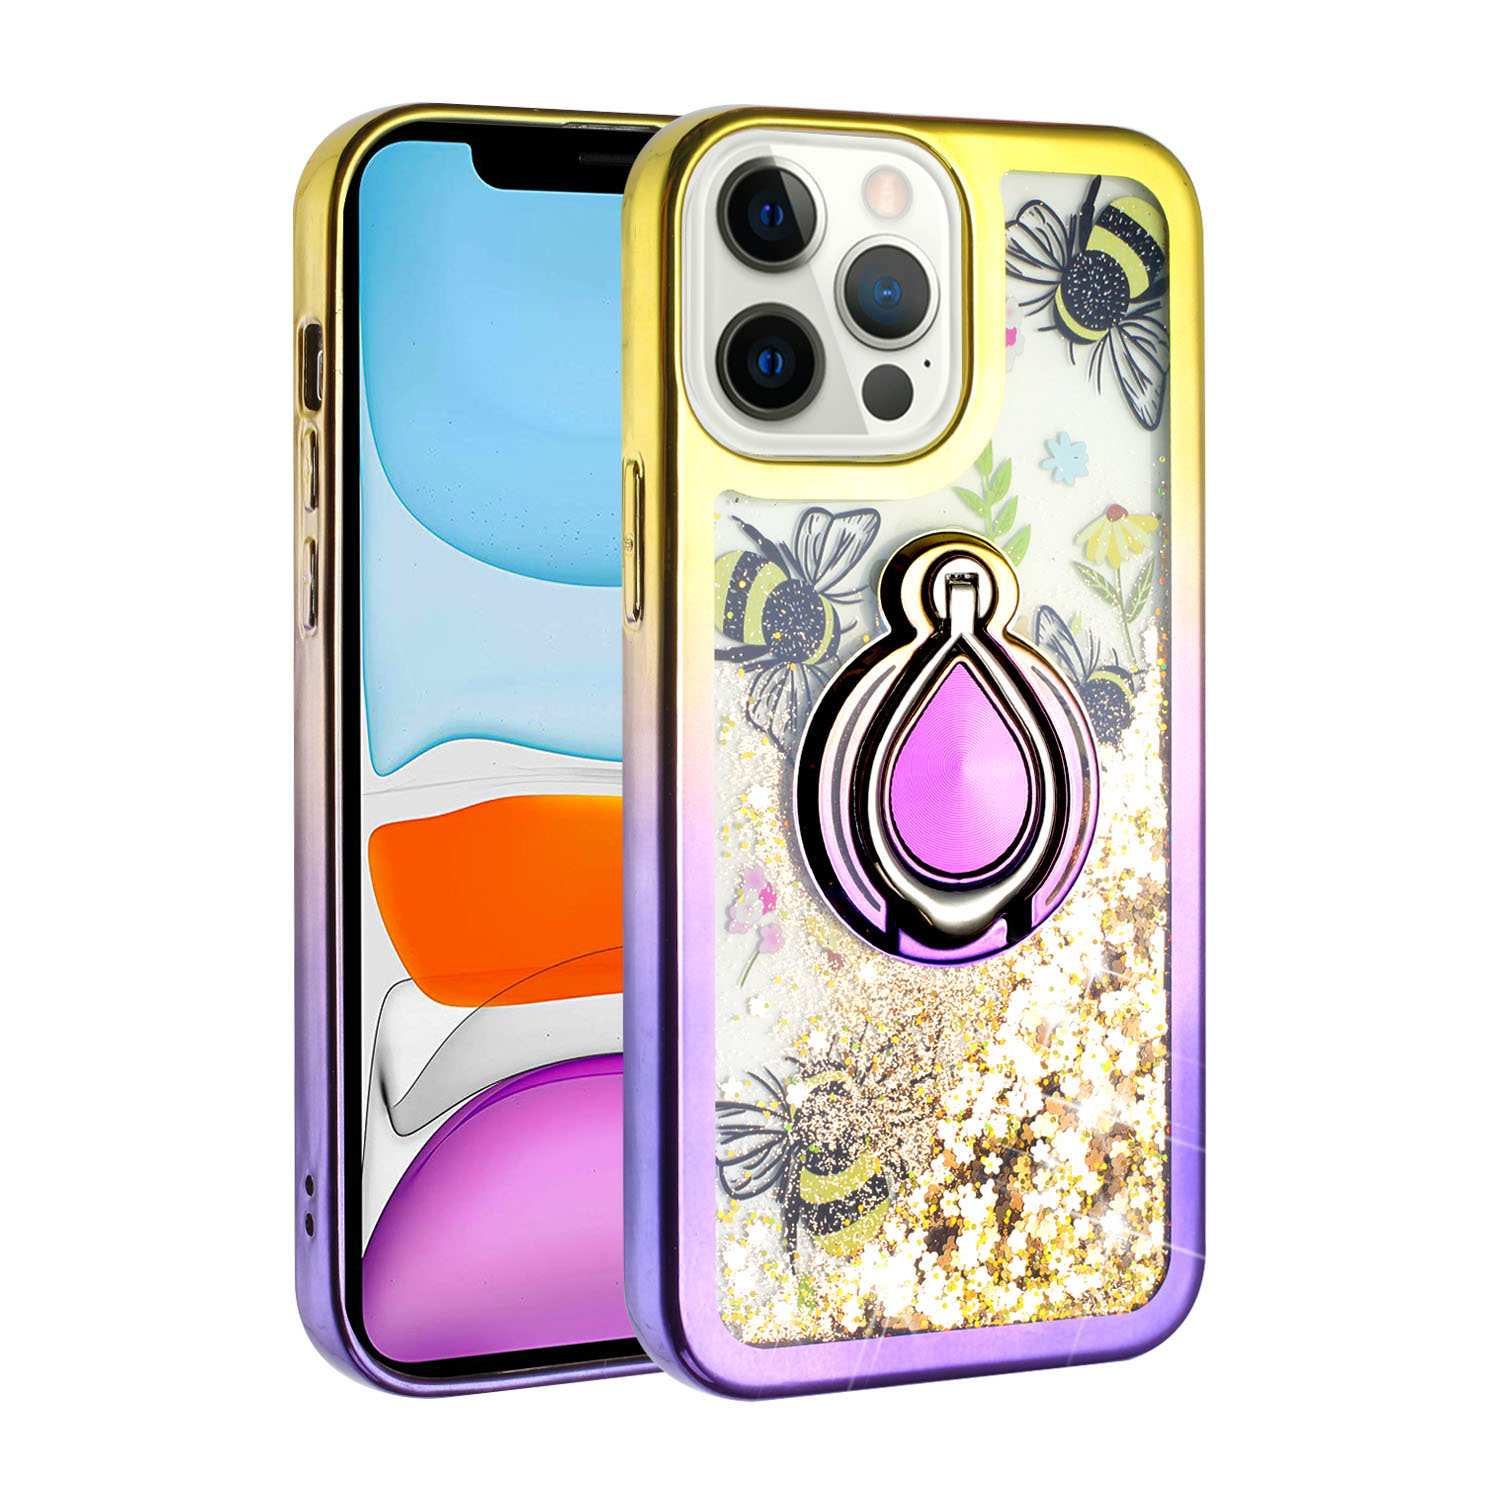 Star Dust Liquid Armor Ring Stand Hybrid Case for Apple iPHONE 13 Pro Max [6.7] (Gold / Purple)